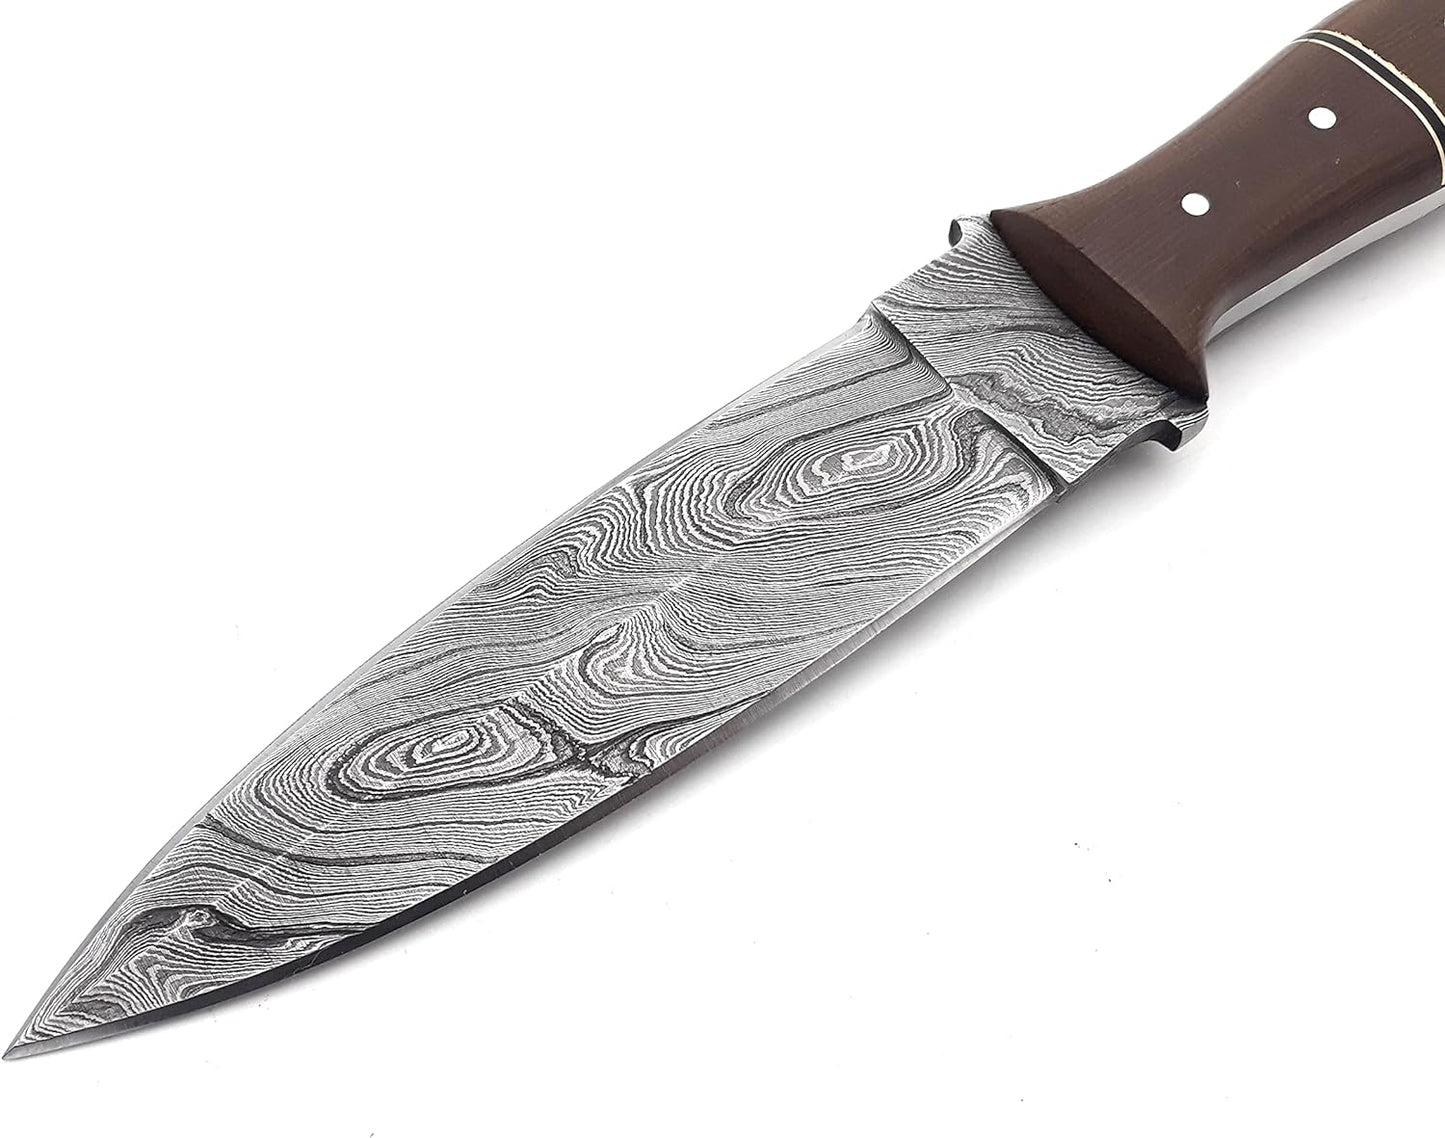 KD Hunting Knife Damascus Steel for Hiking Camping with Leather Sheath